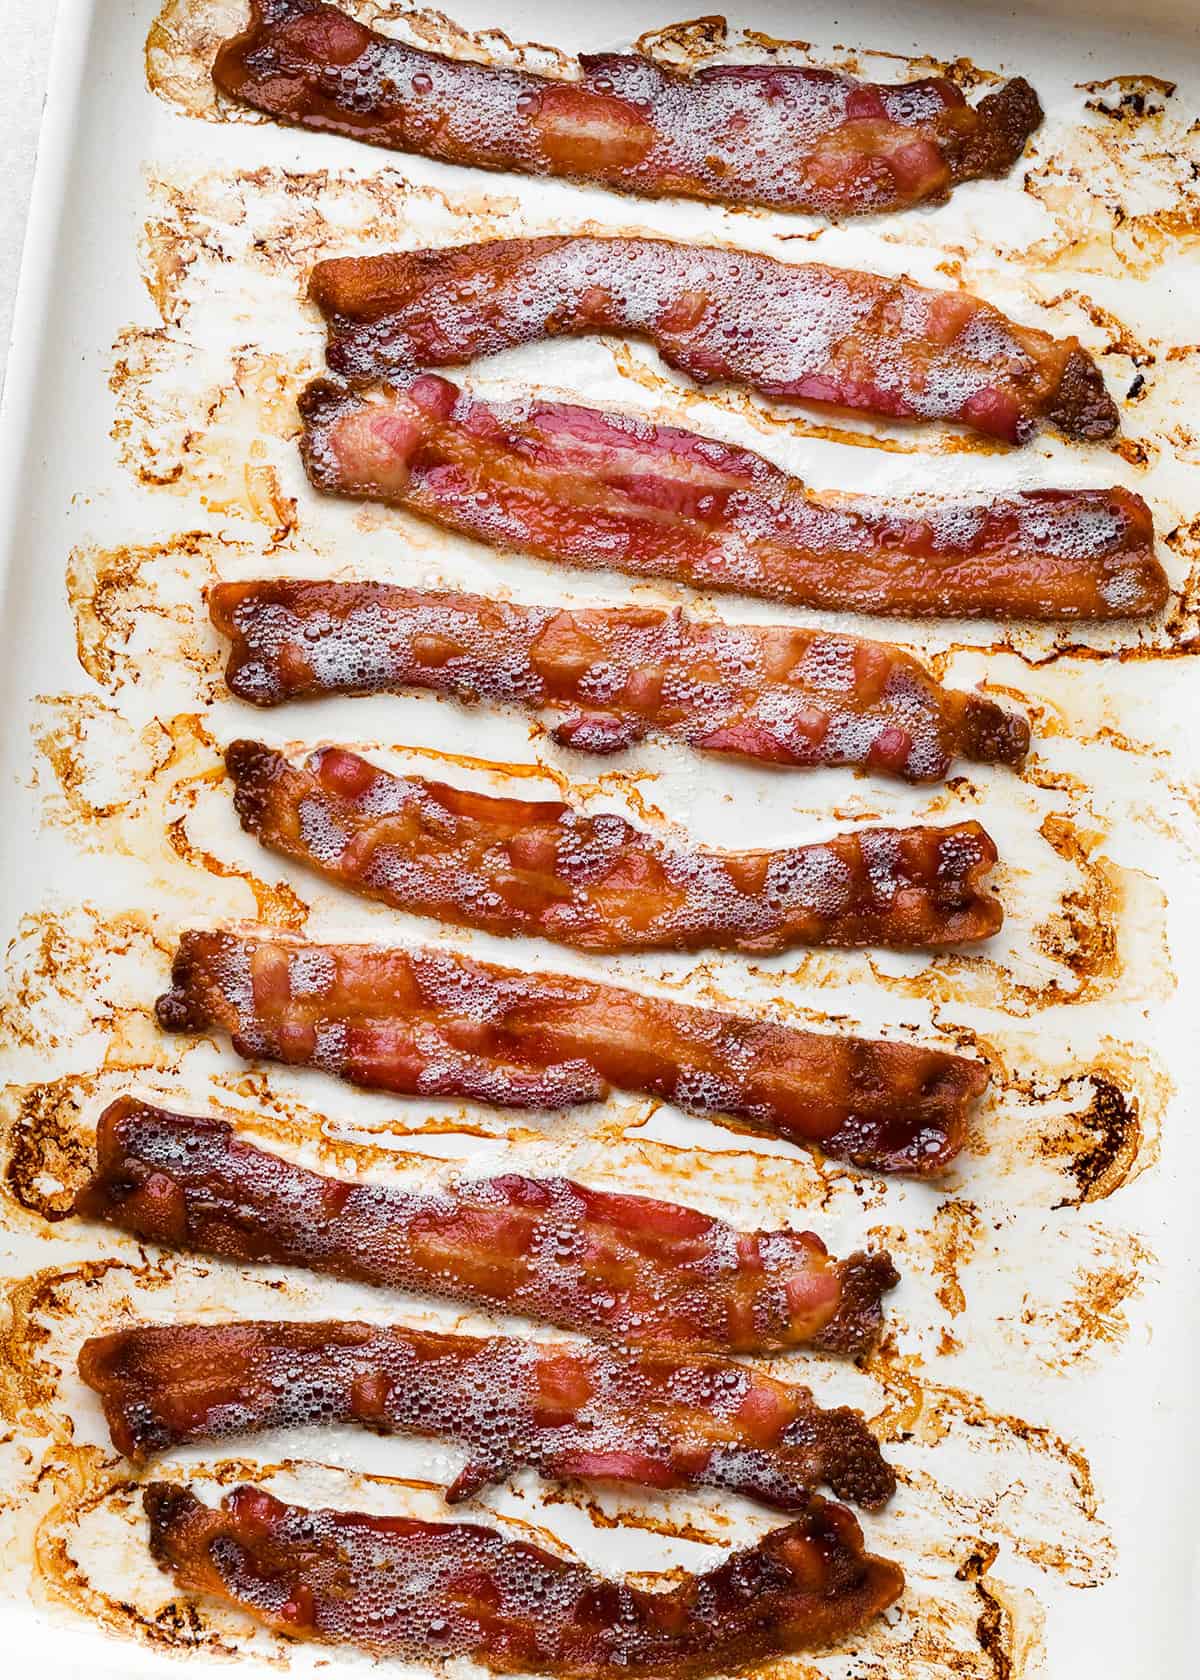 How to Cook Bacon in the Oven - 9 cooked pieces of bacon on a baking sheet